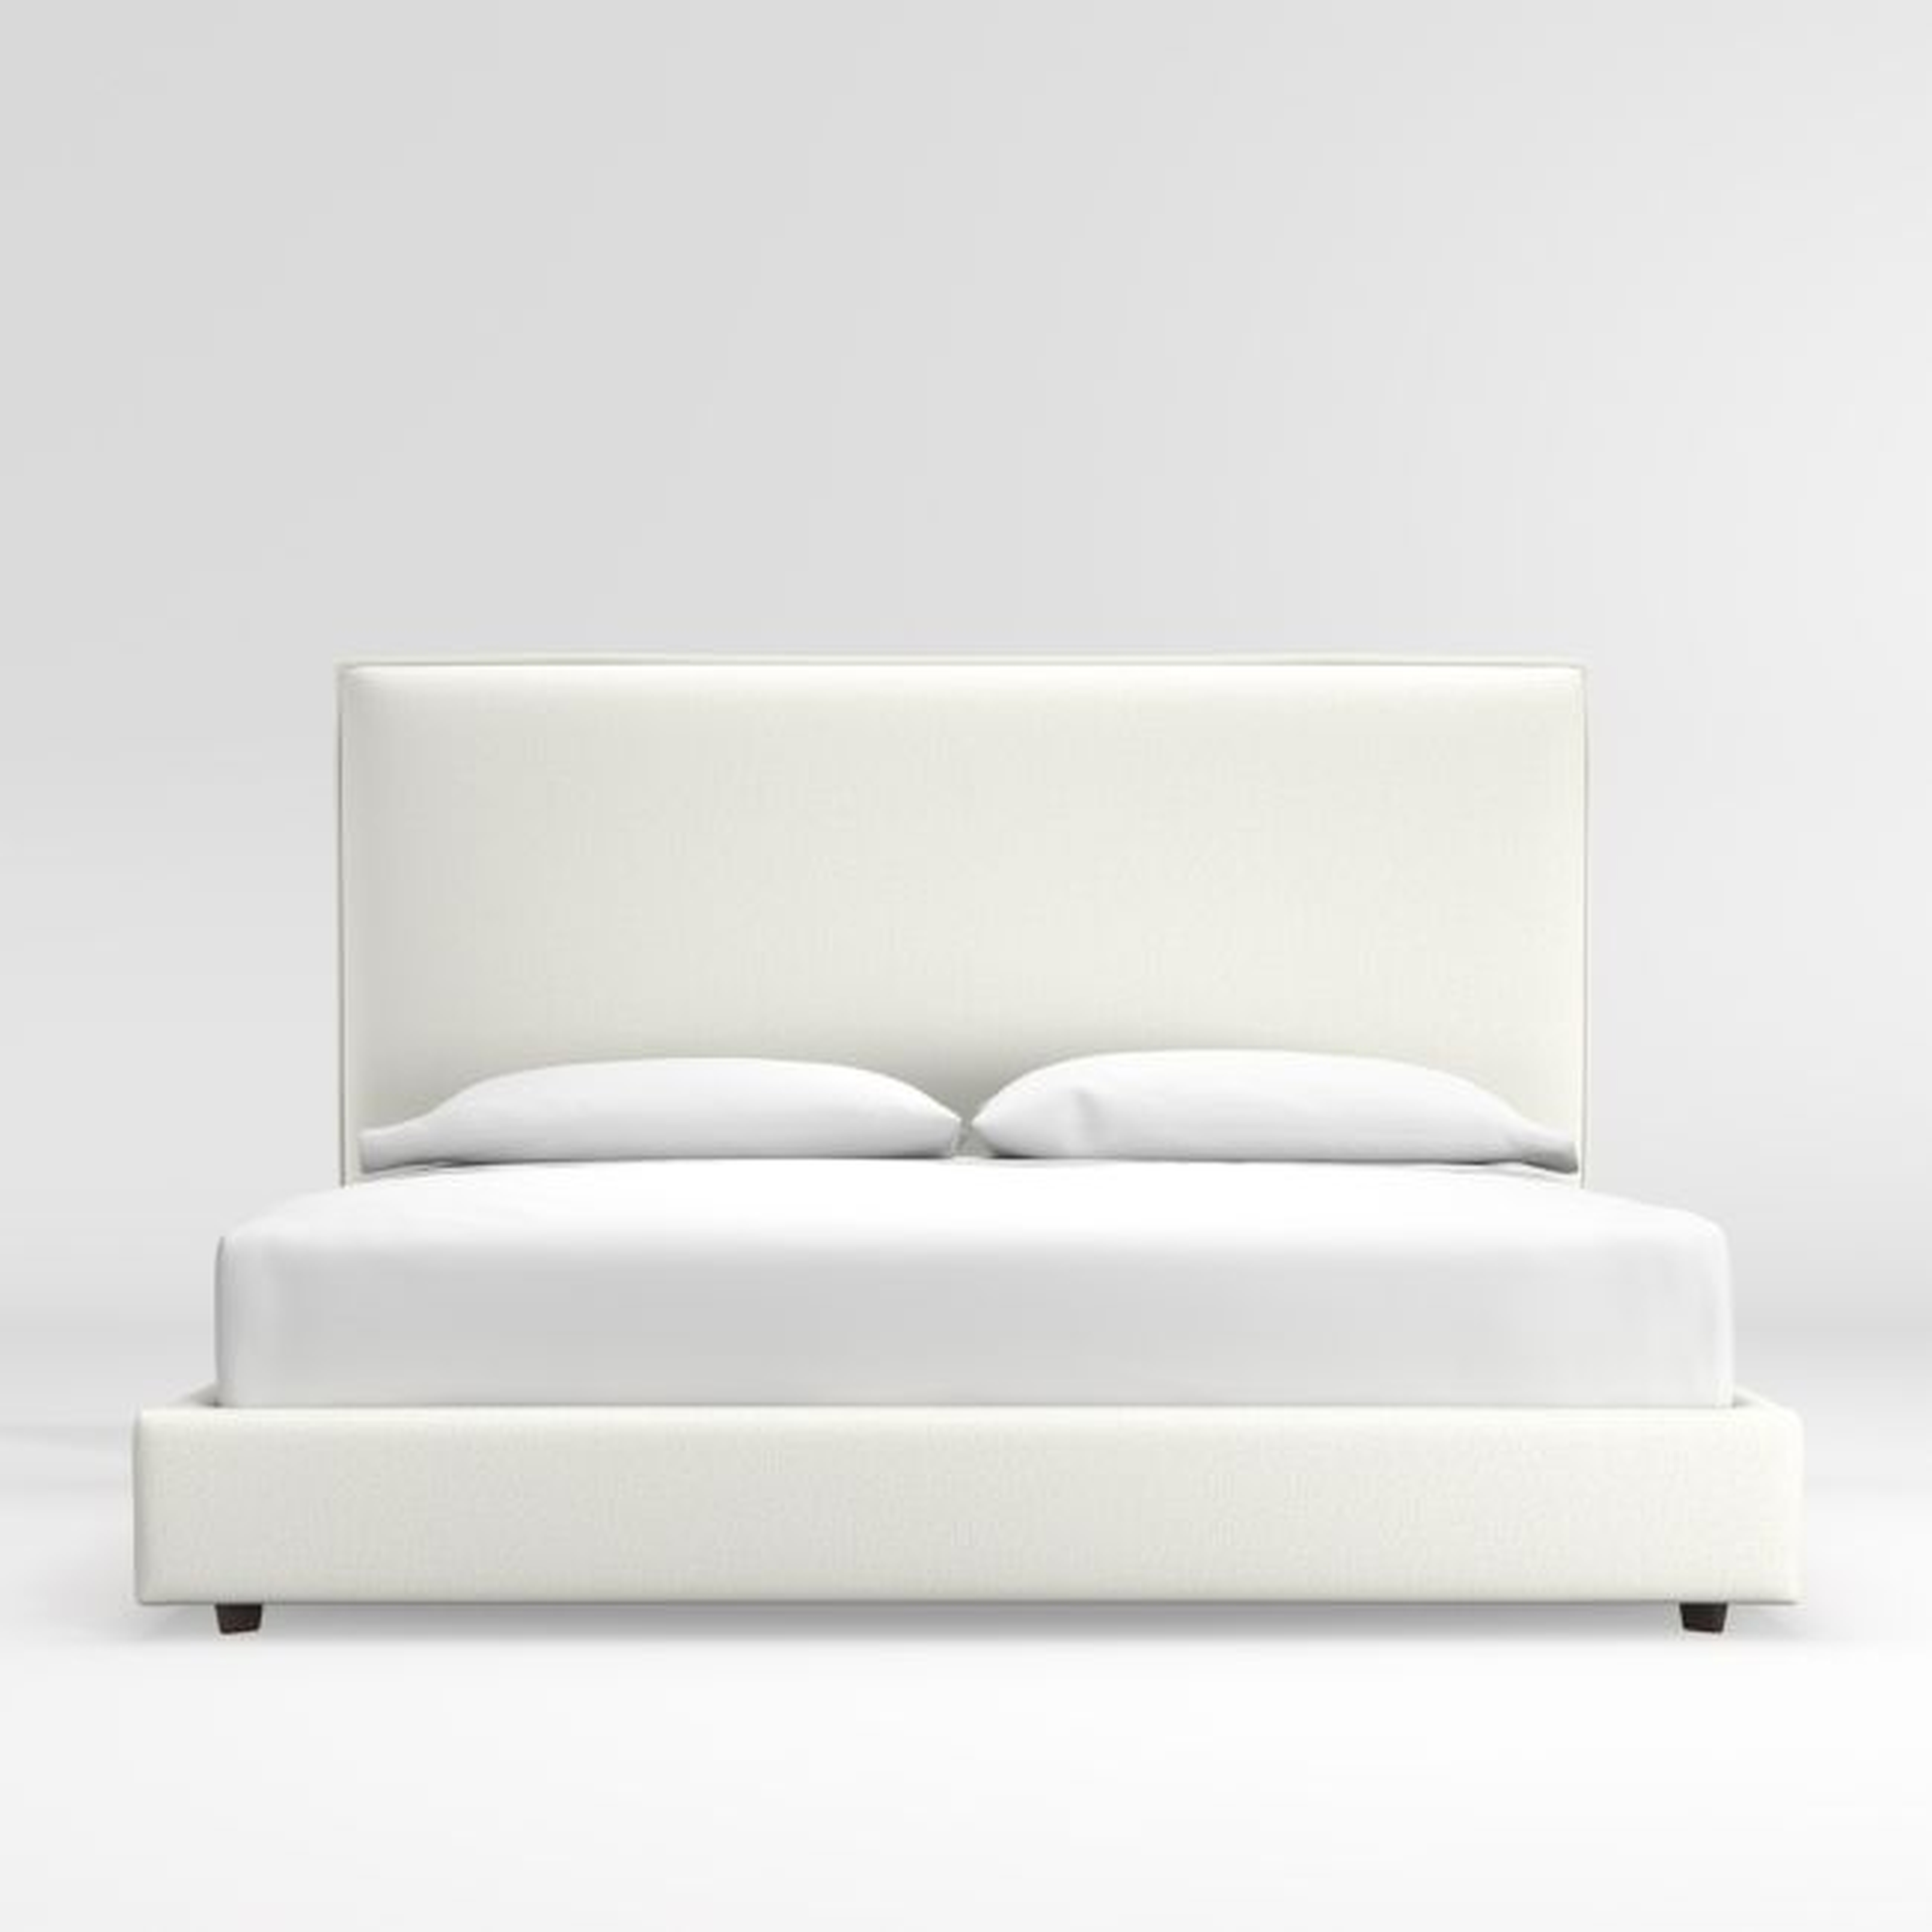 Lotus Upholstered California King Bed with 53.5" Headboard - Crate and Barrel